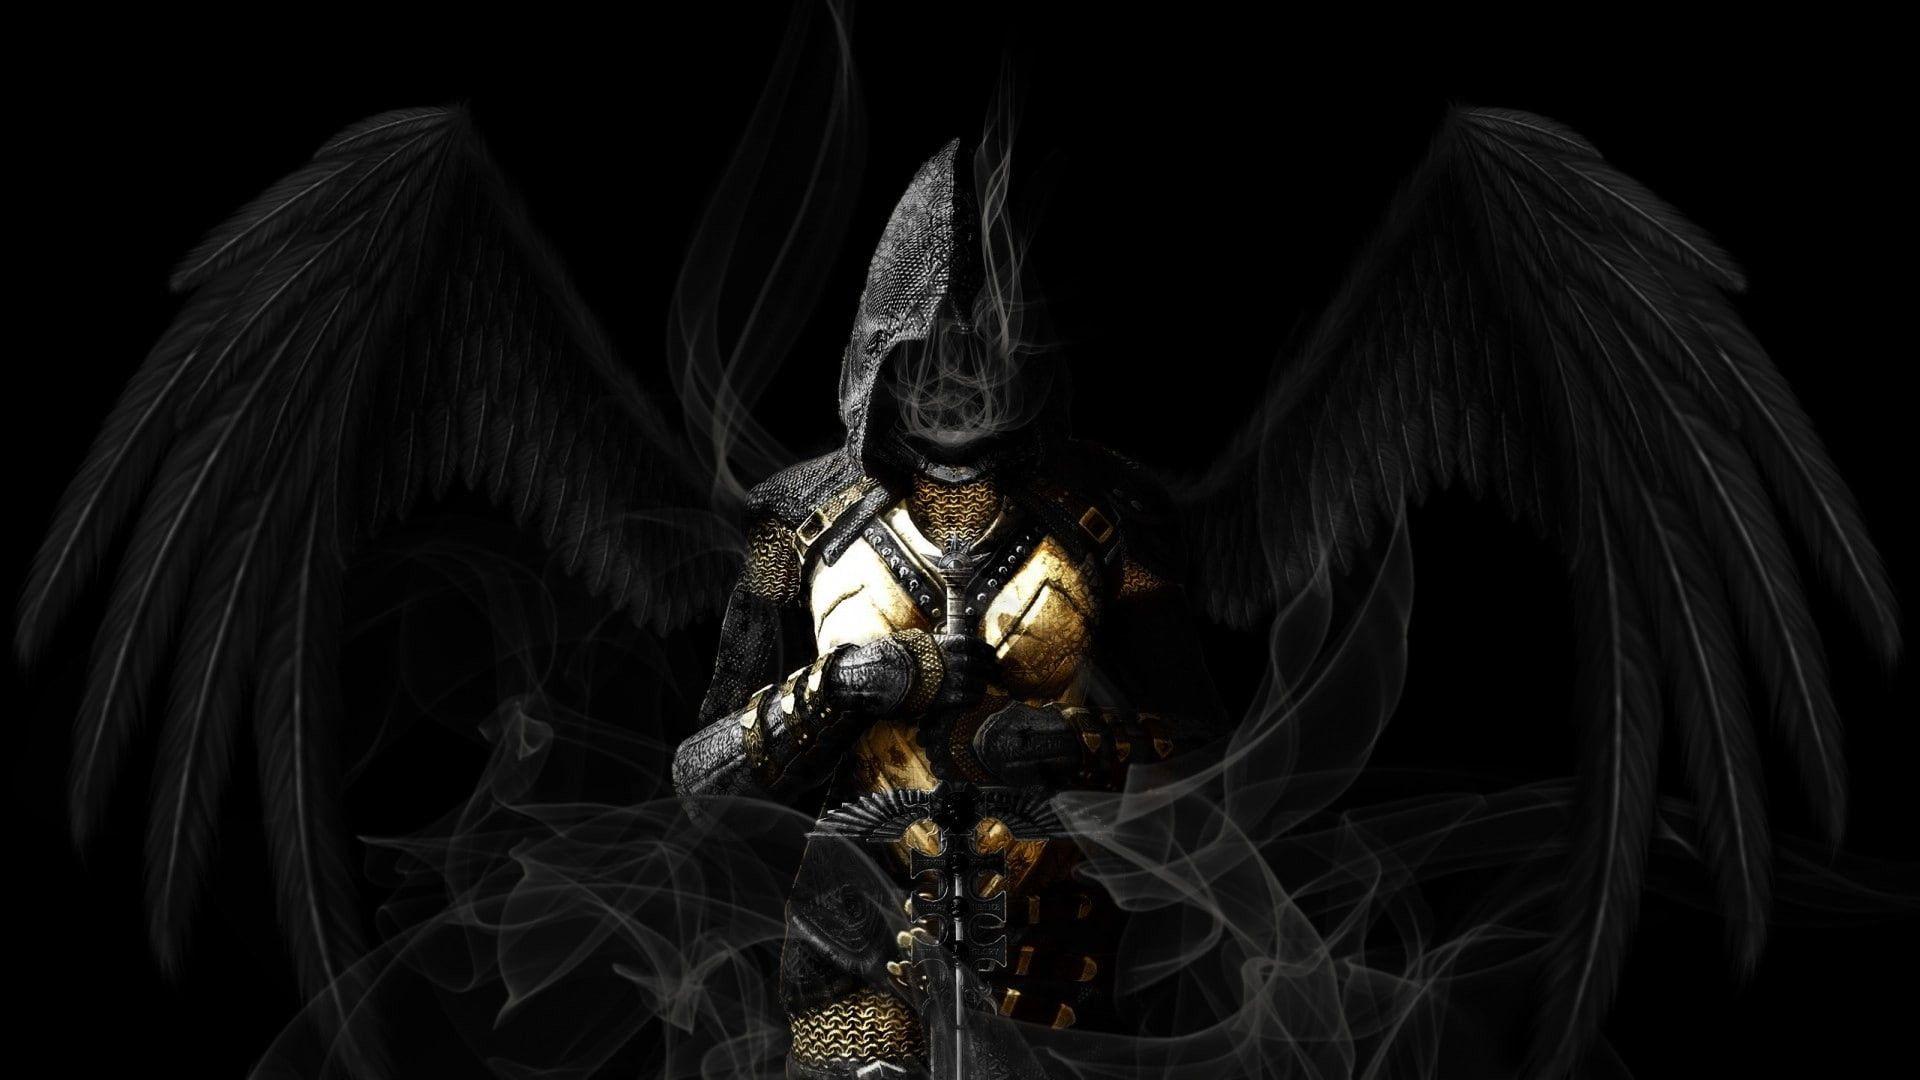 prompthunt archangel michael fighting lucifer 8k wallpaper size ultra  who god watching the fight as lucifer unleashes dark magic wounding michael